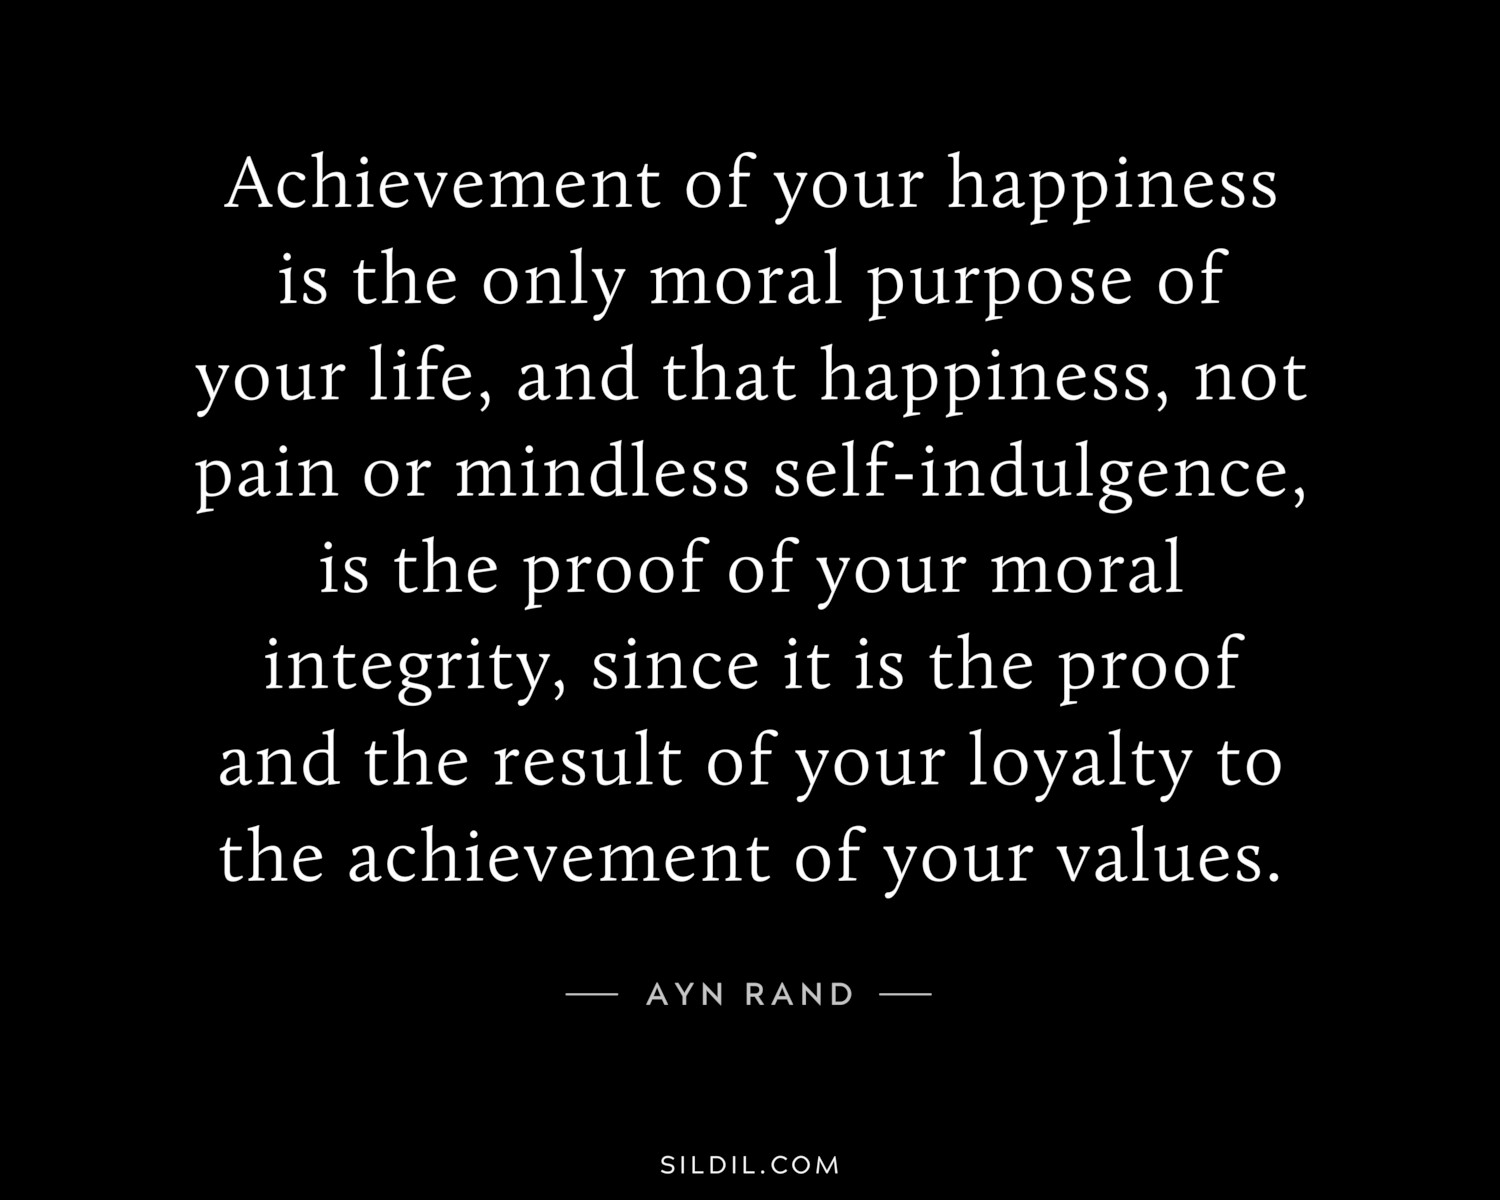 Achievement of your happiness is the only moral purpose of your life, and that happiness, not pain or mindless self-indulgence, is the proof of your moral integrity, since it is the proof and the result of your loyalty to the achievement of your values.